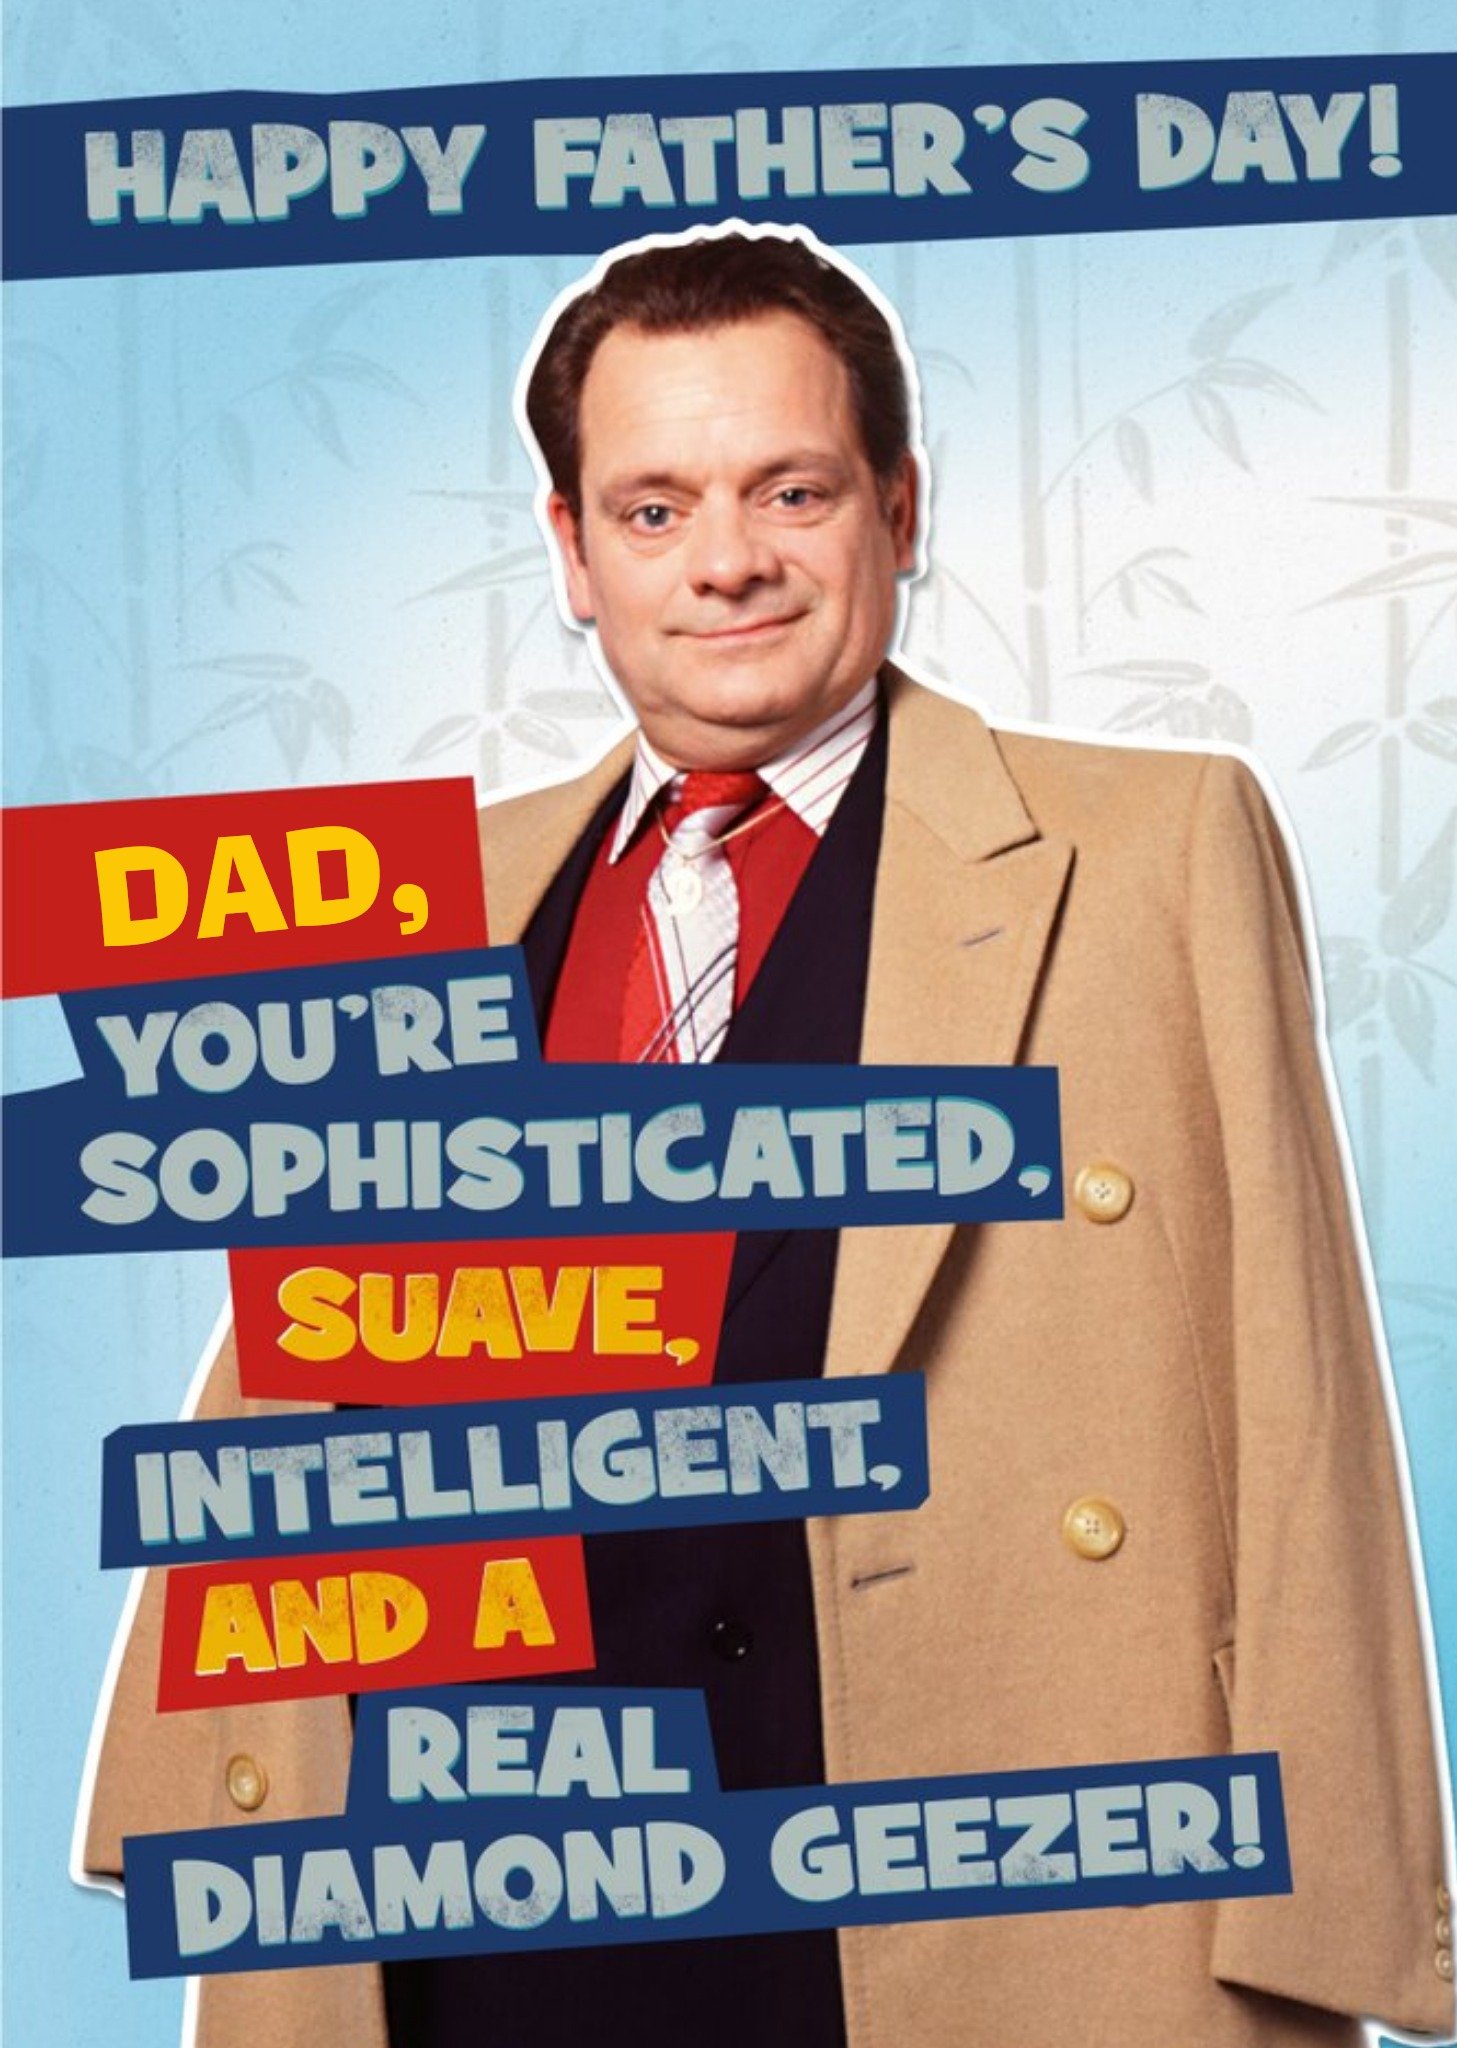 Only Fools And Horses You're A Diamond Geezer Father's Day Card Ecard